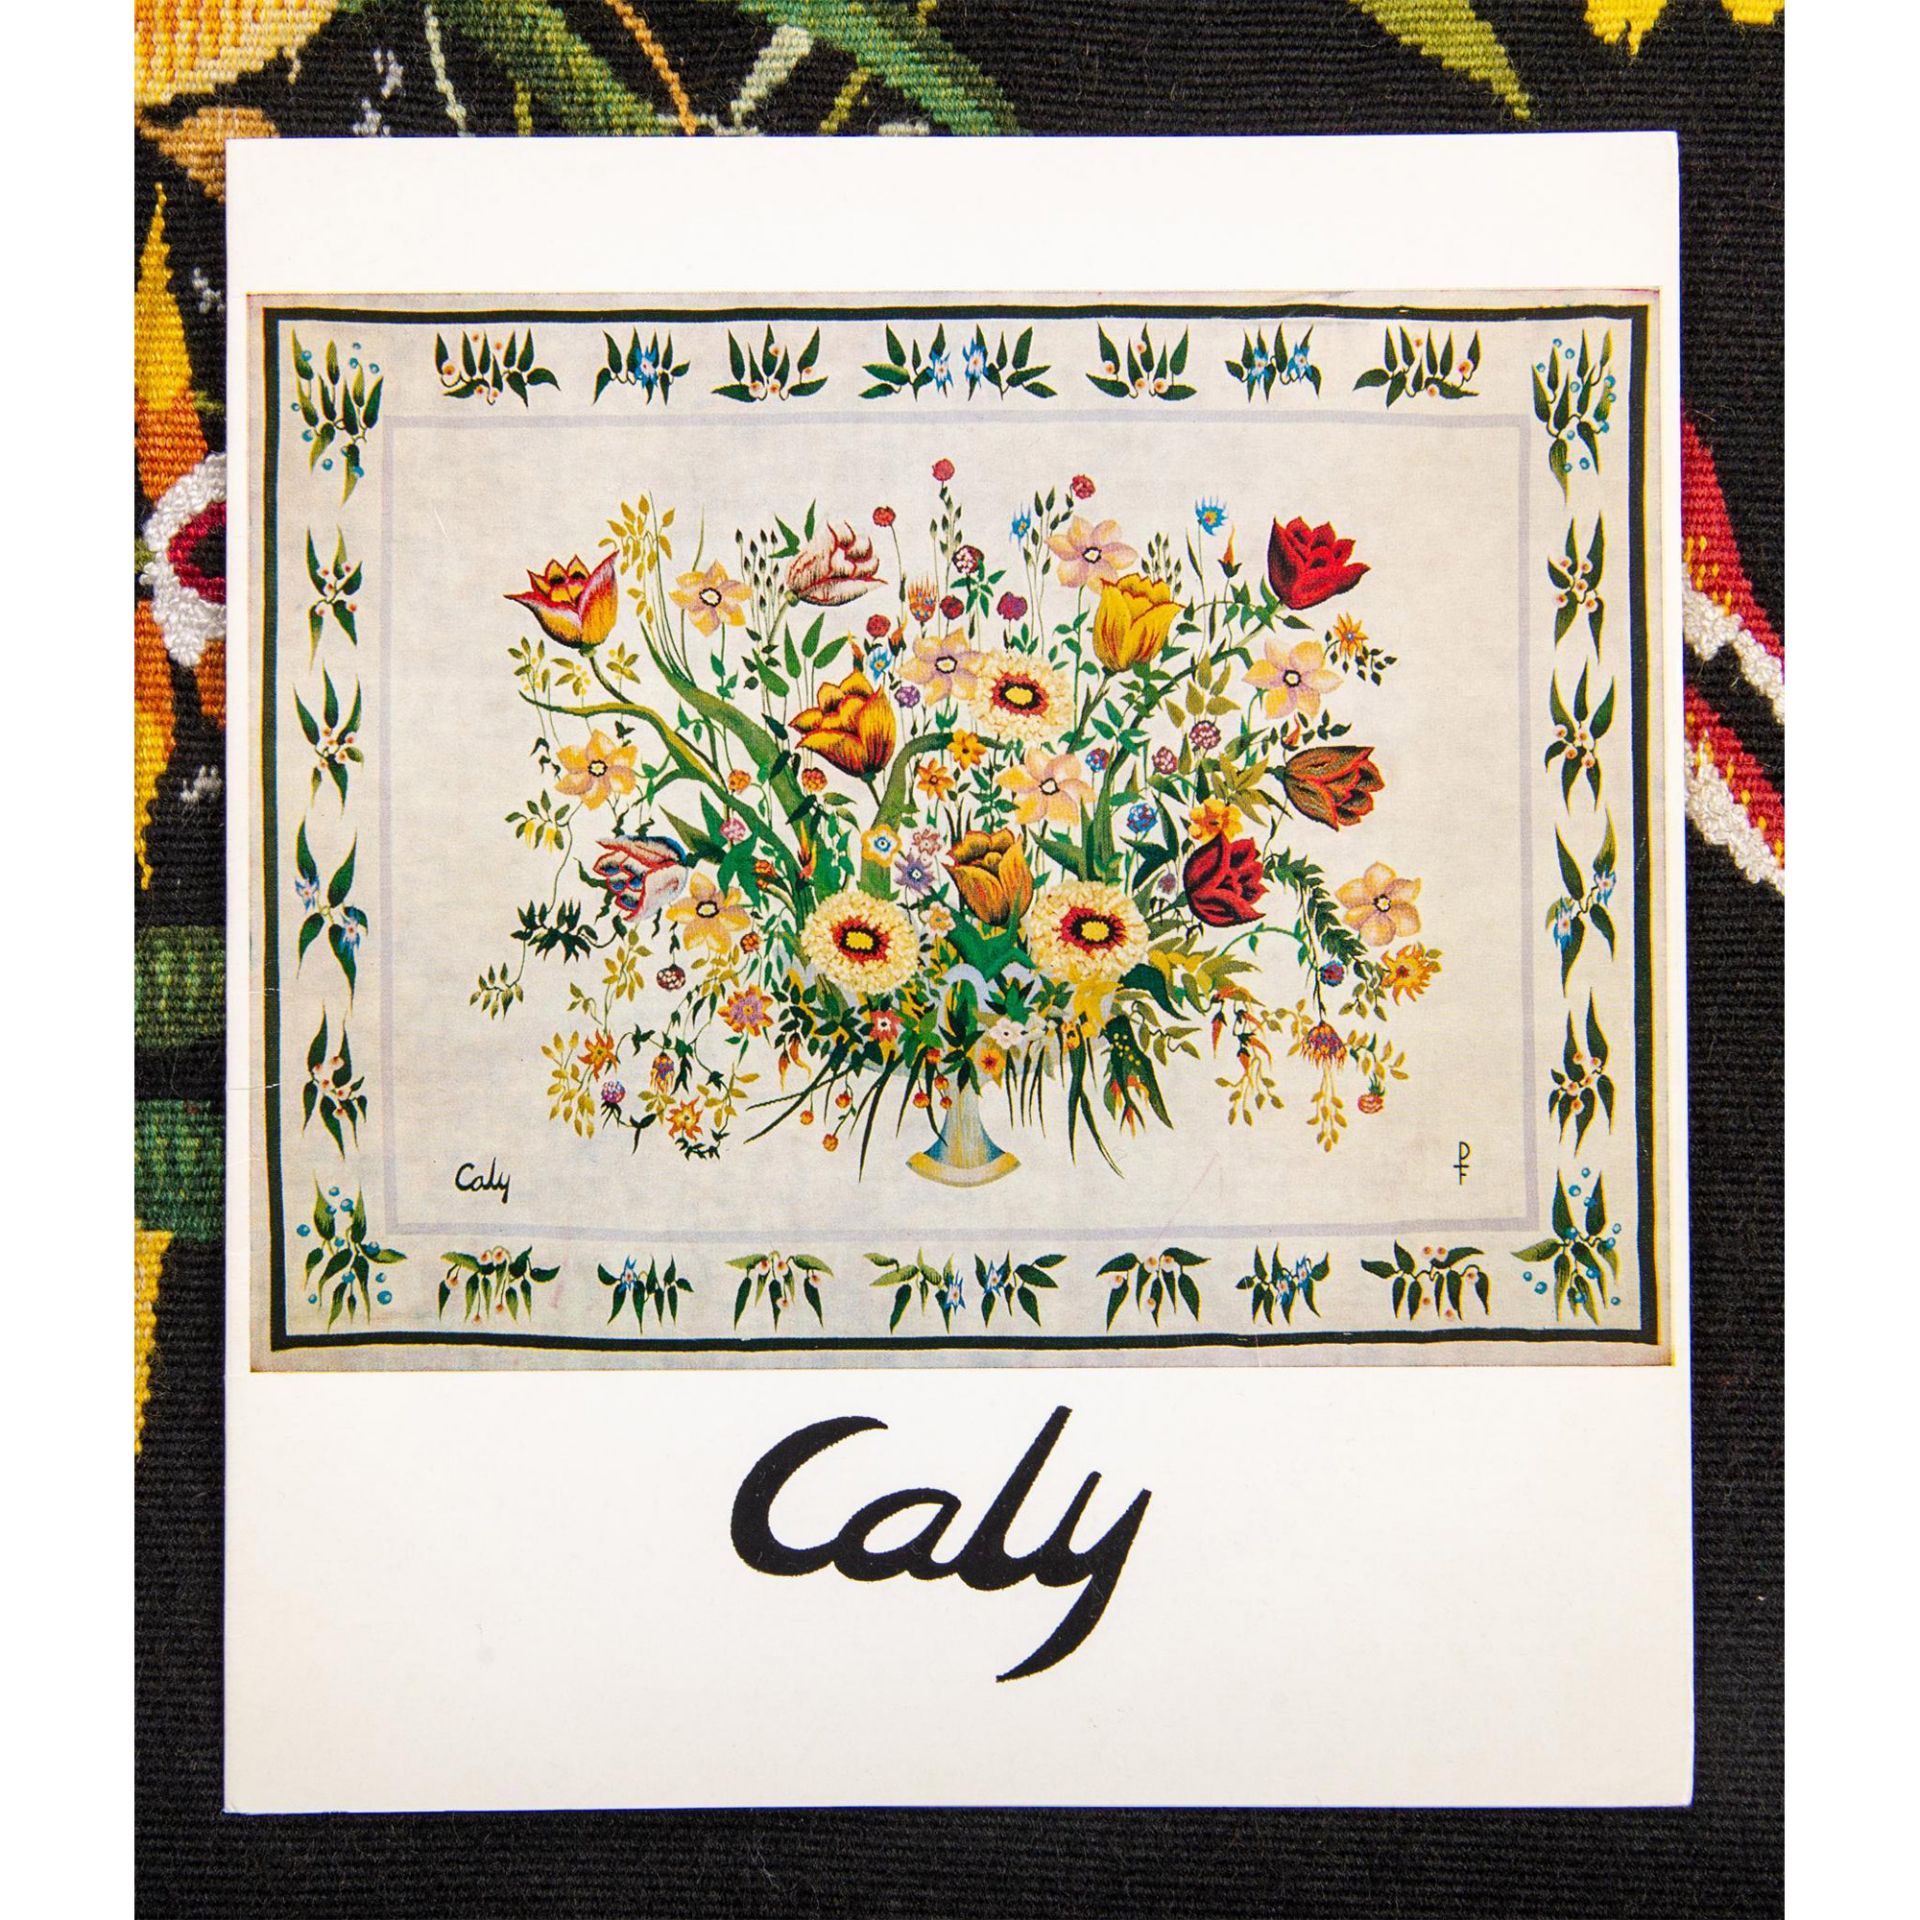 Caly Odette Aubusson Tapestry, A Voix Basse - Image 7 of 11